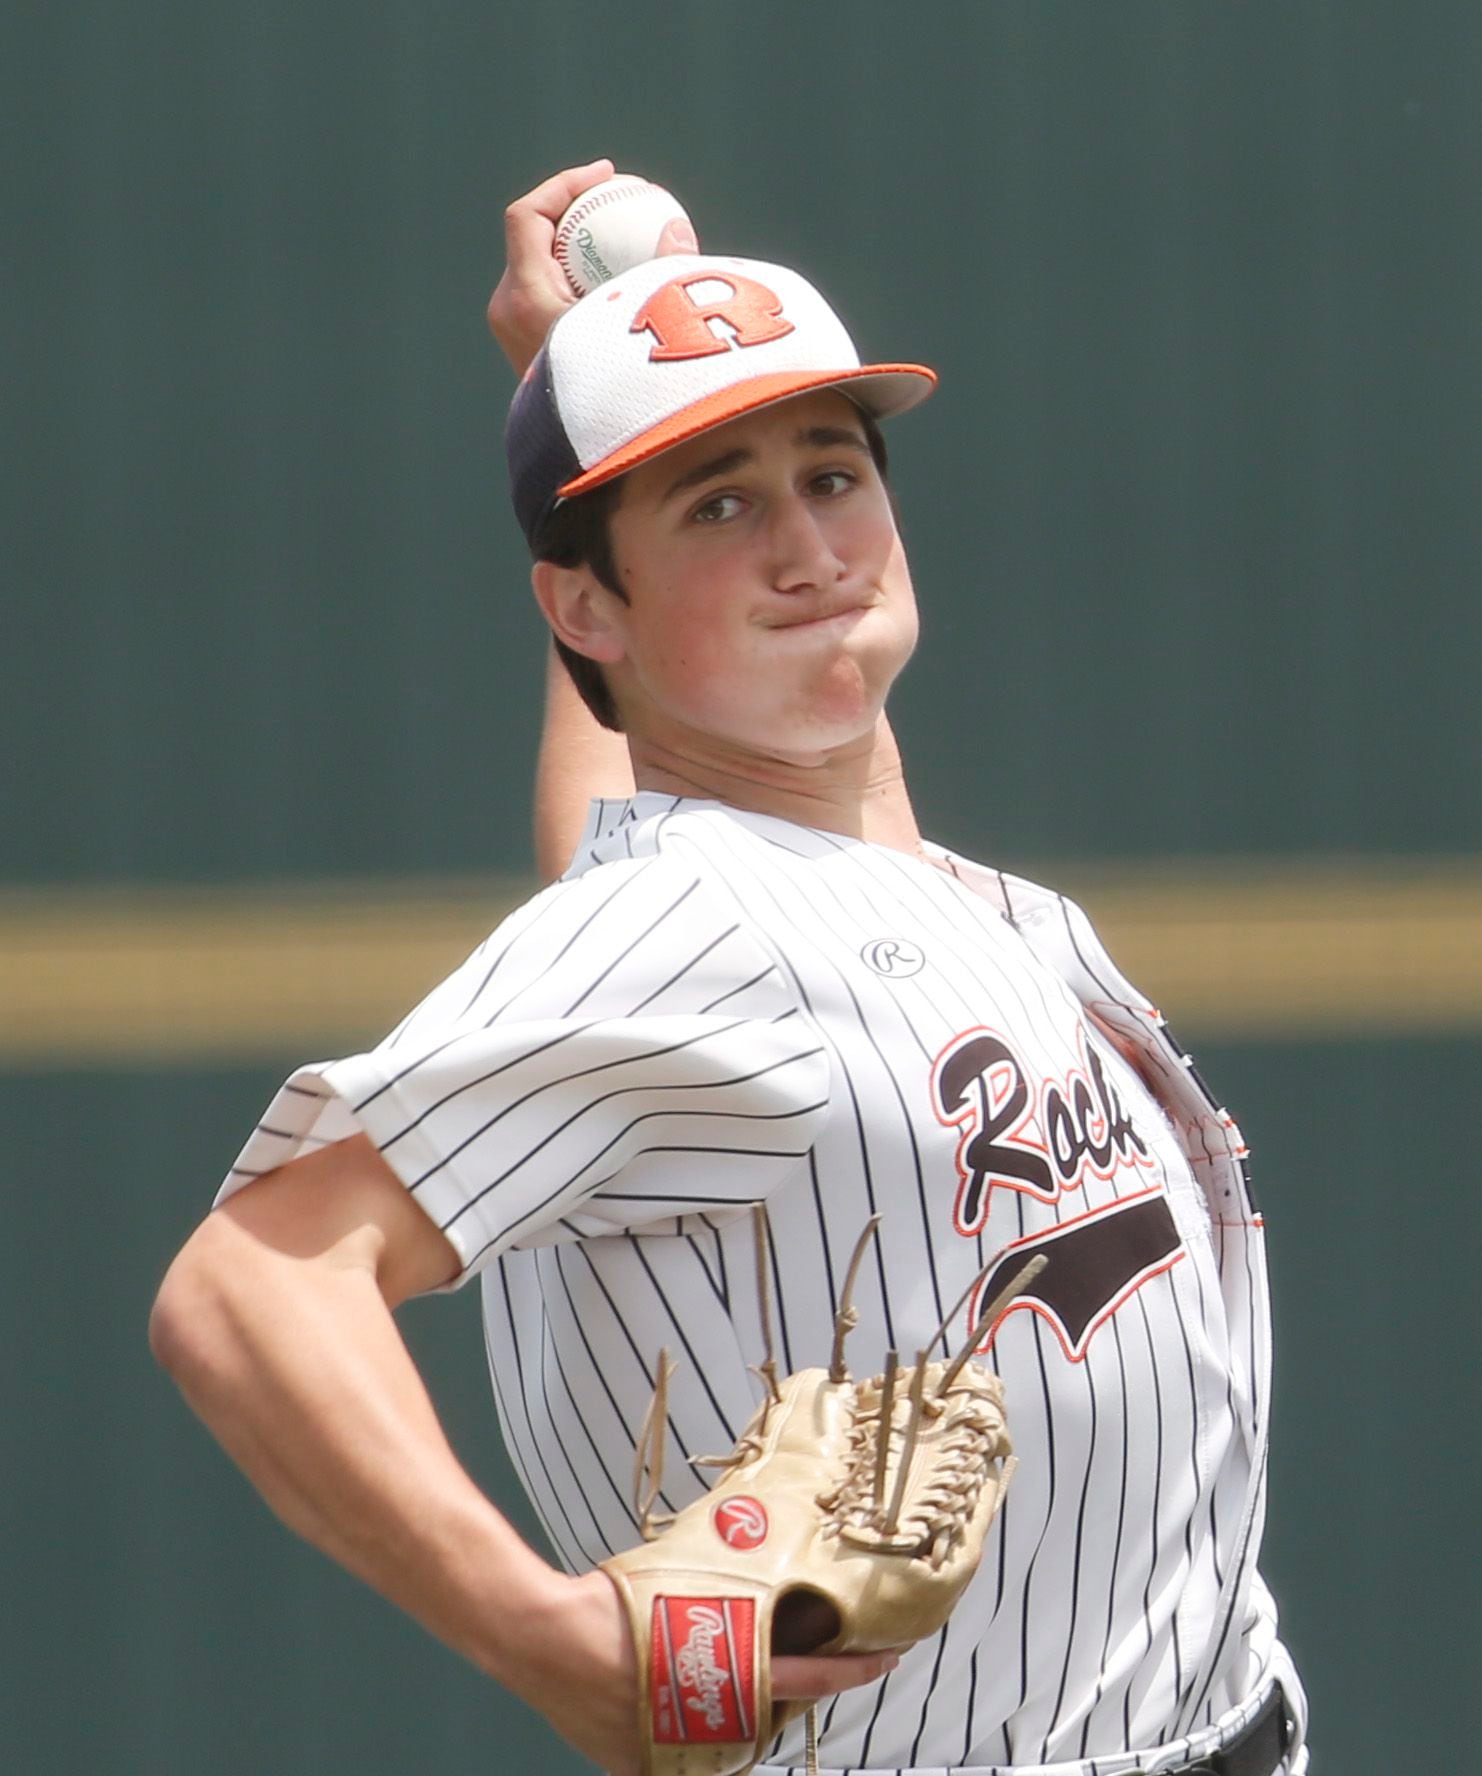 Rockwall pitcher Cade Crossland (8) delivers a pitch in the top of the first inning of play...